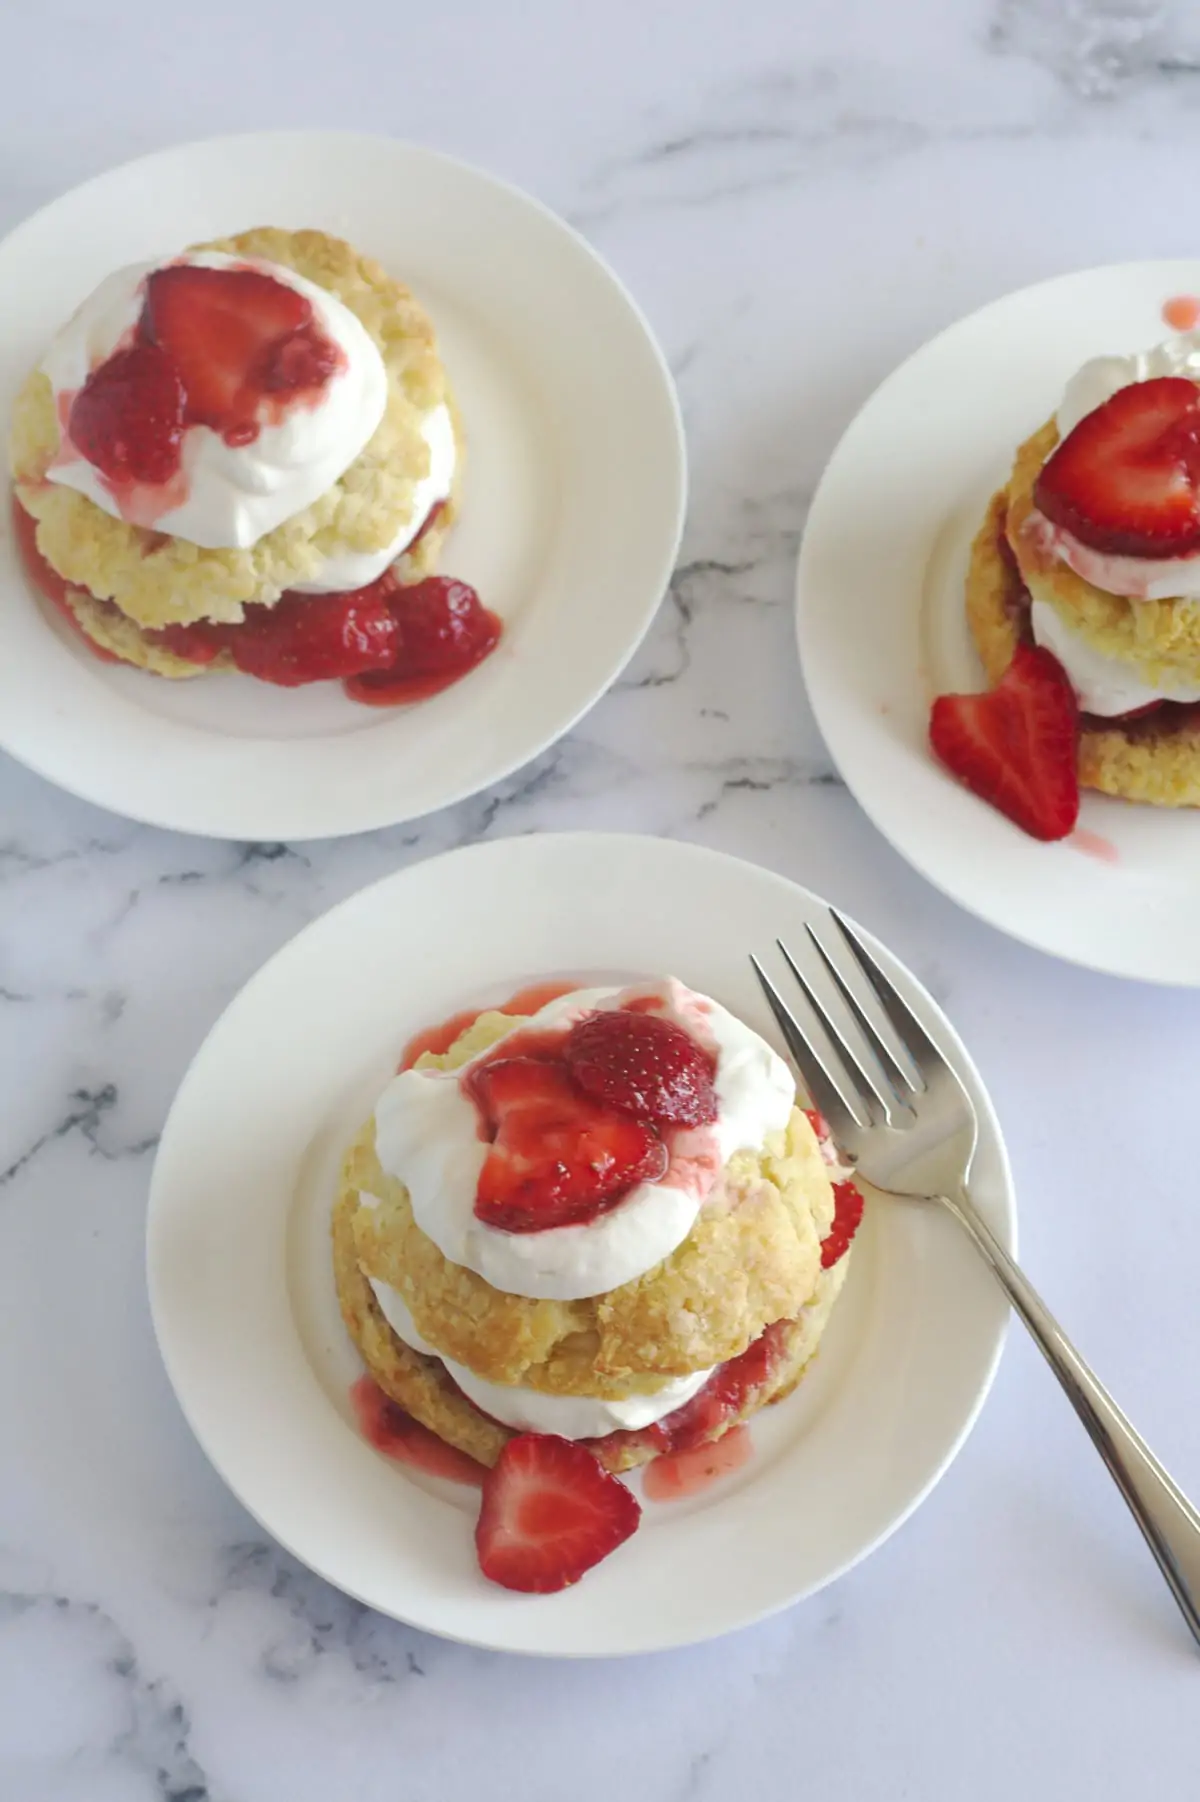 An above view of strawberry shortcakes on plates.  The bottom one has a fork on the plate.